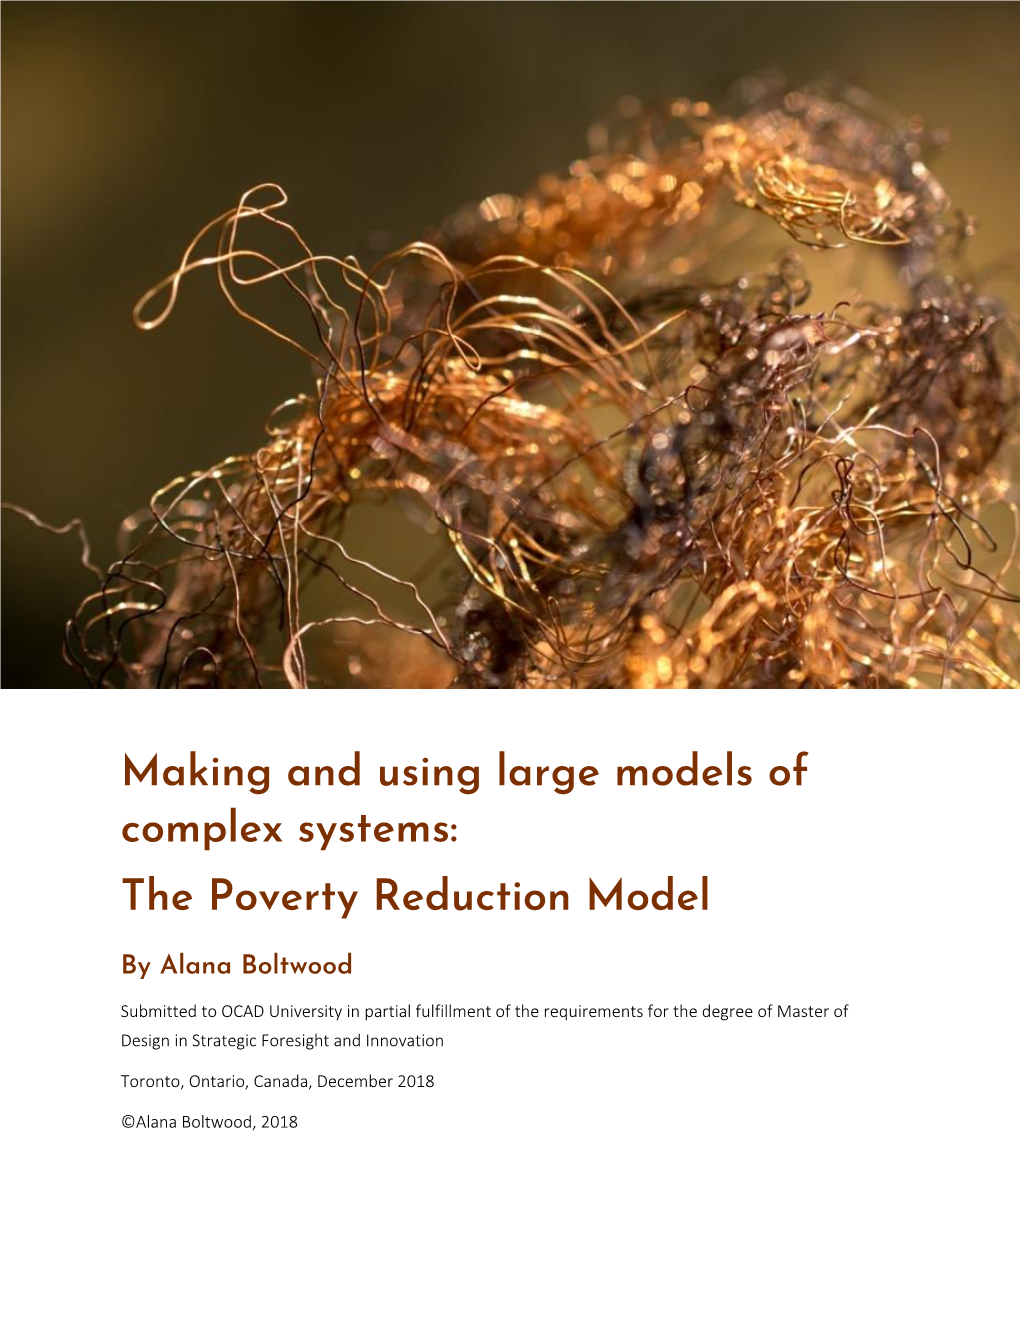 The Poverty Reduction Model